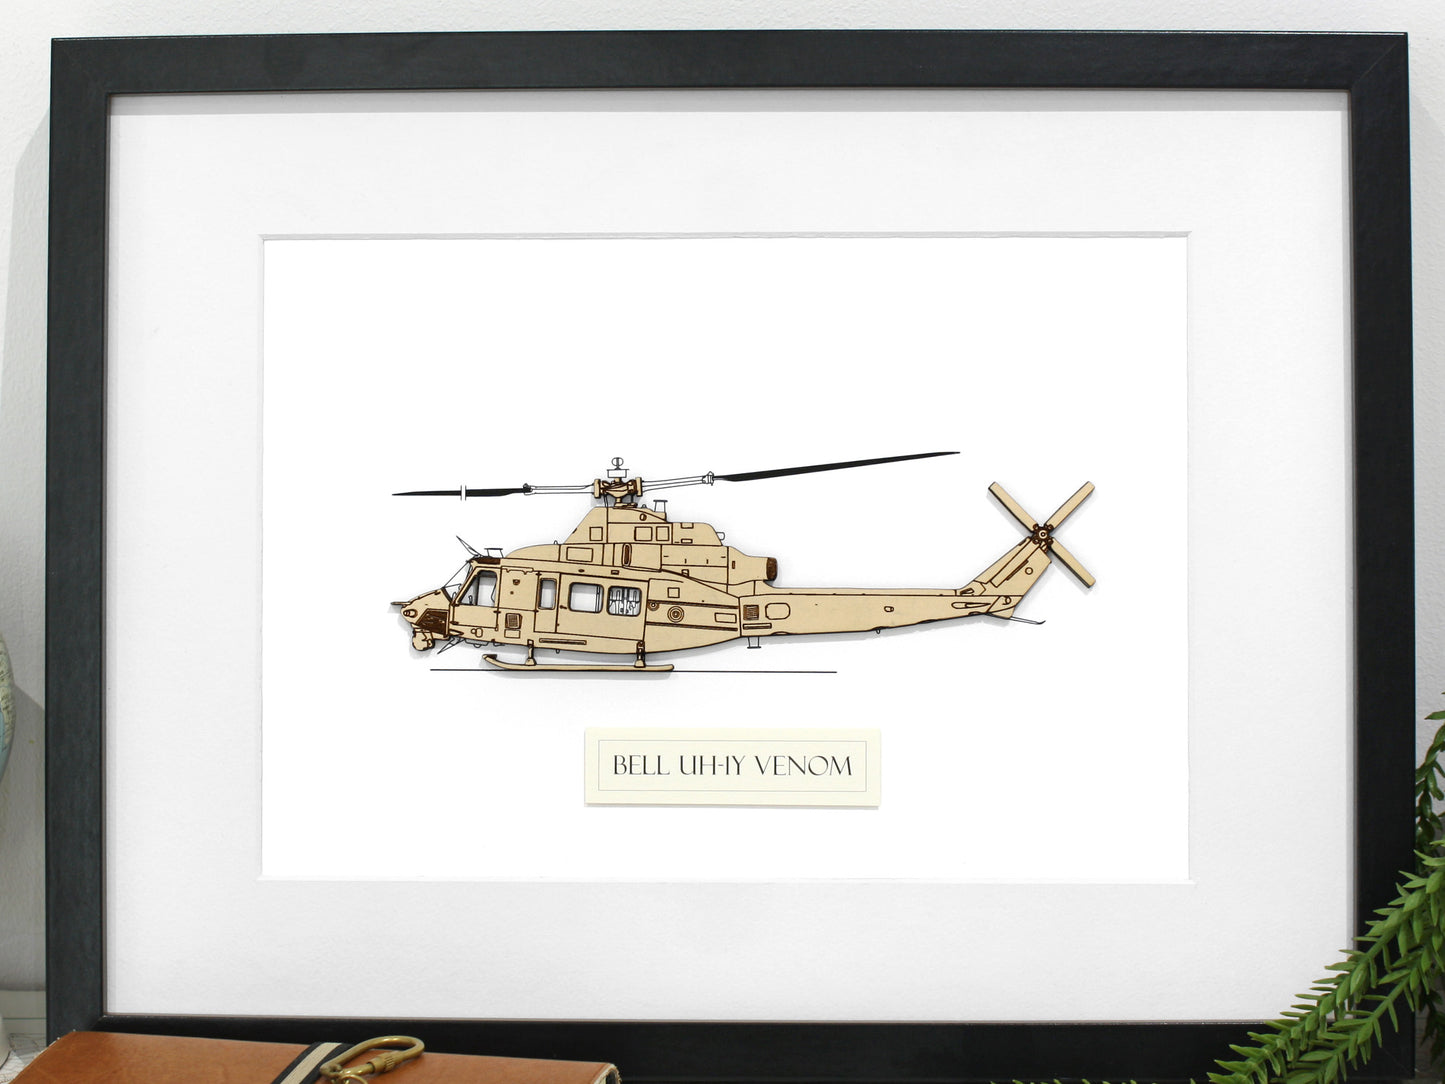 Bell UH-1Y Venom helicopter art